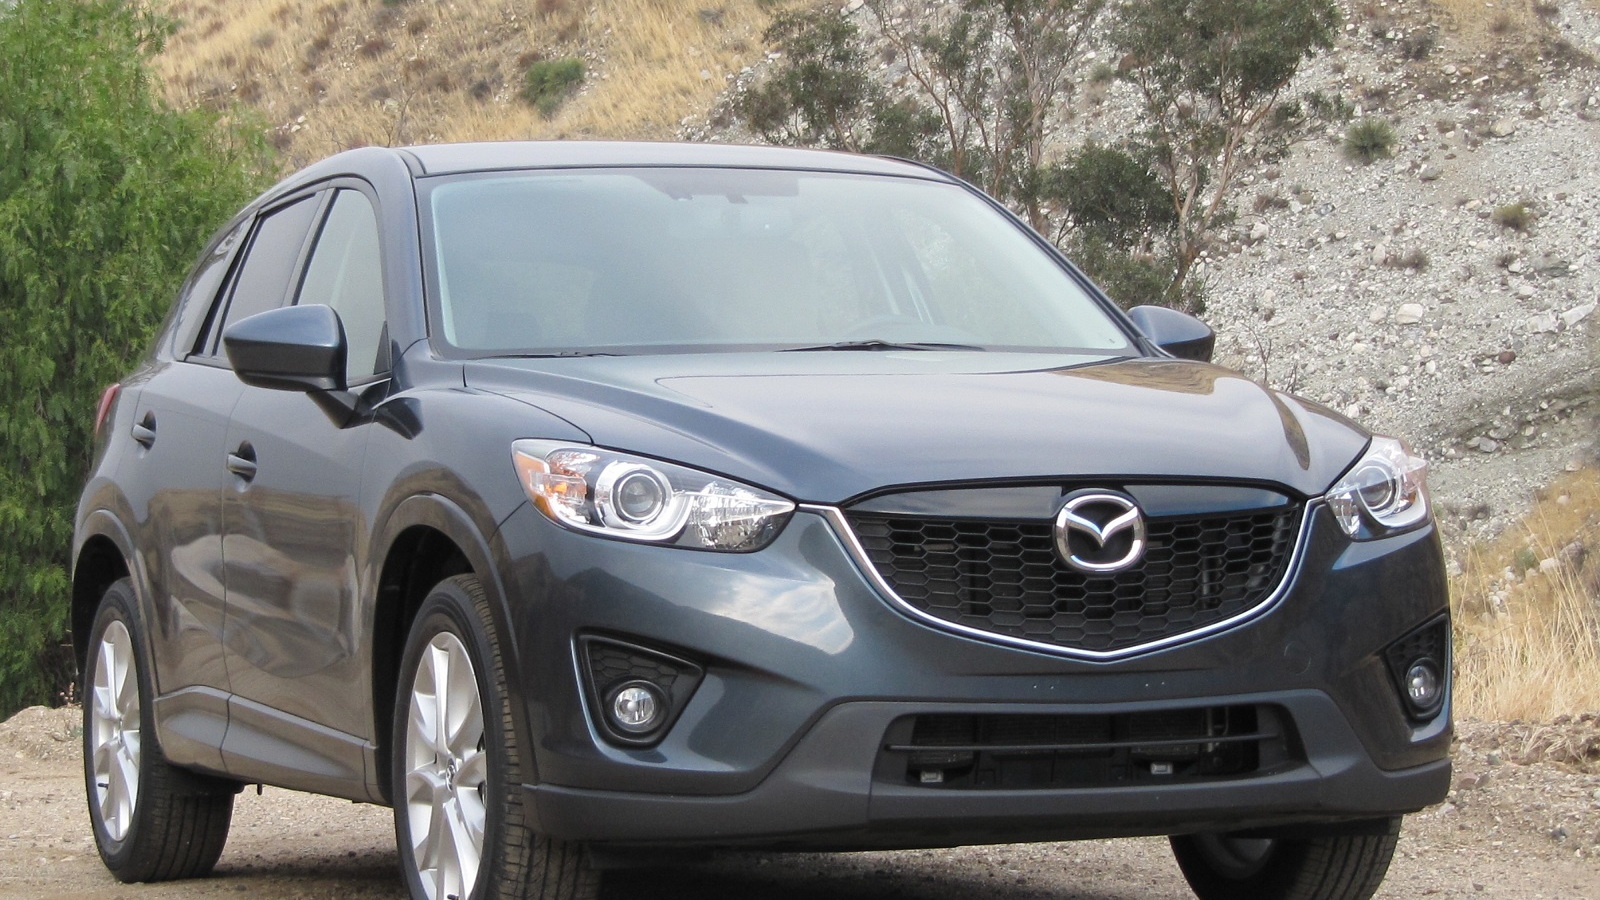 2013 Mazda CX-5 compact crossover on test drive, Southern California, Nov 2011